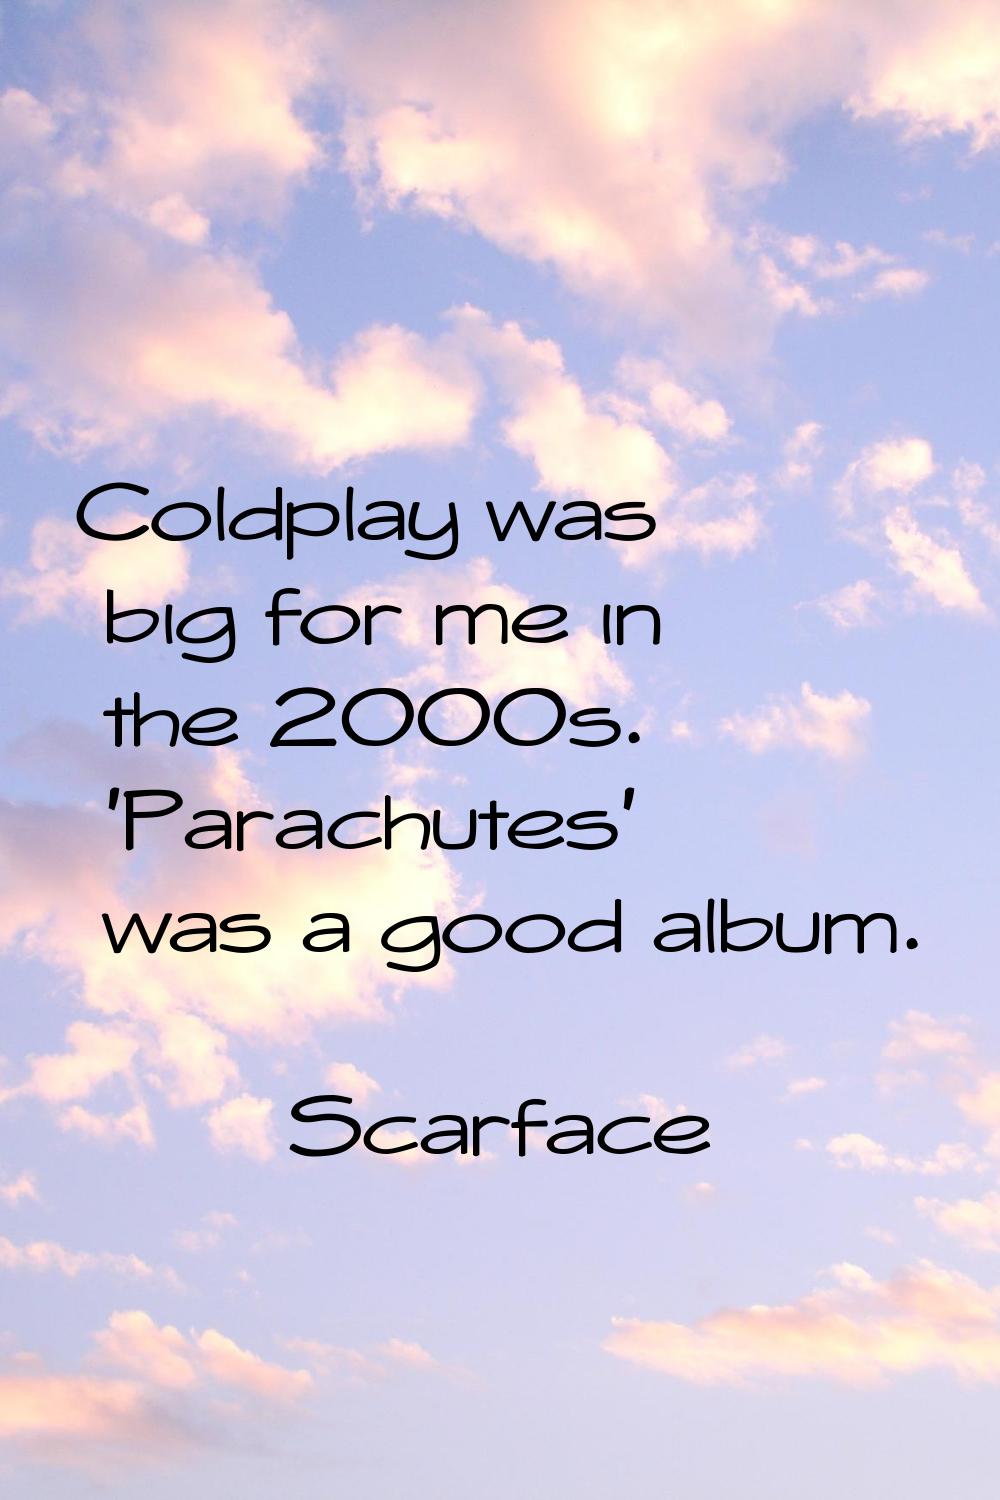 Coldplay was big for me in the 2000s. 'Parachutes' was a good album.